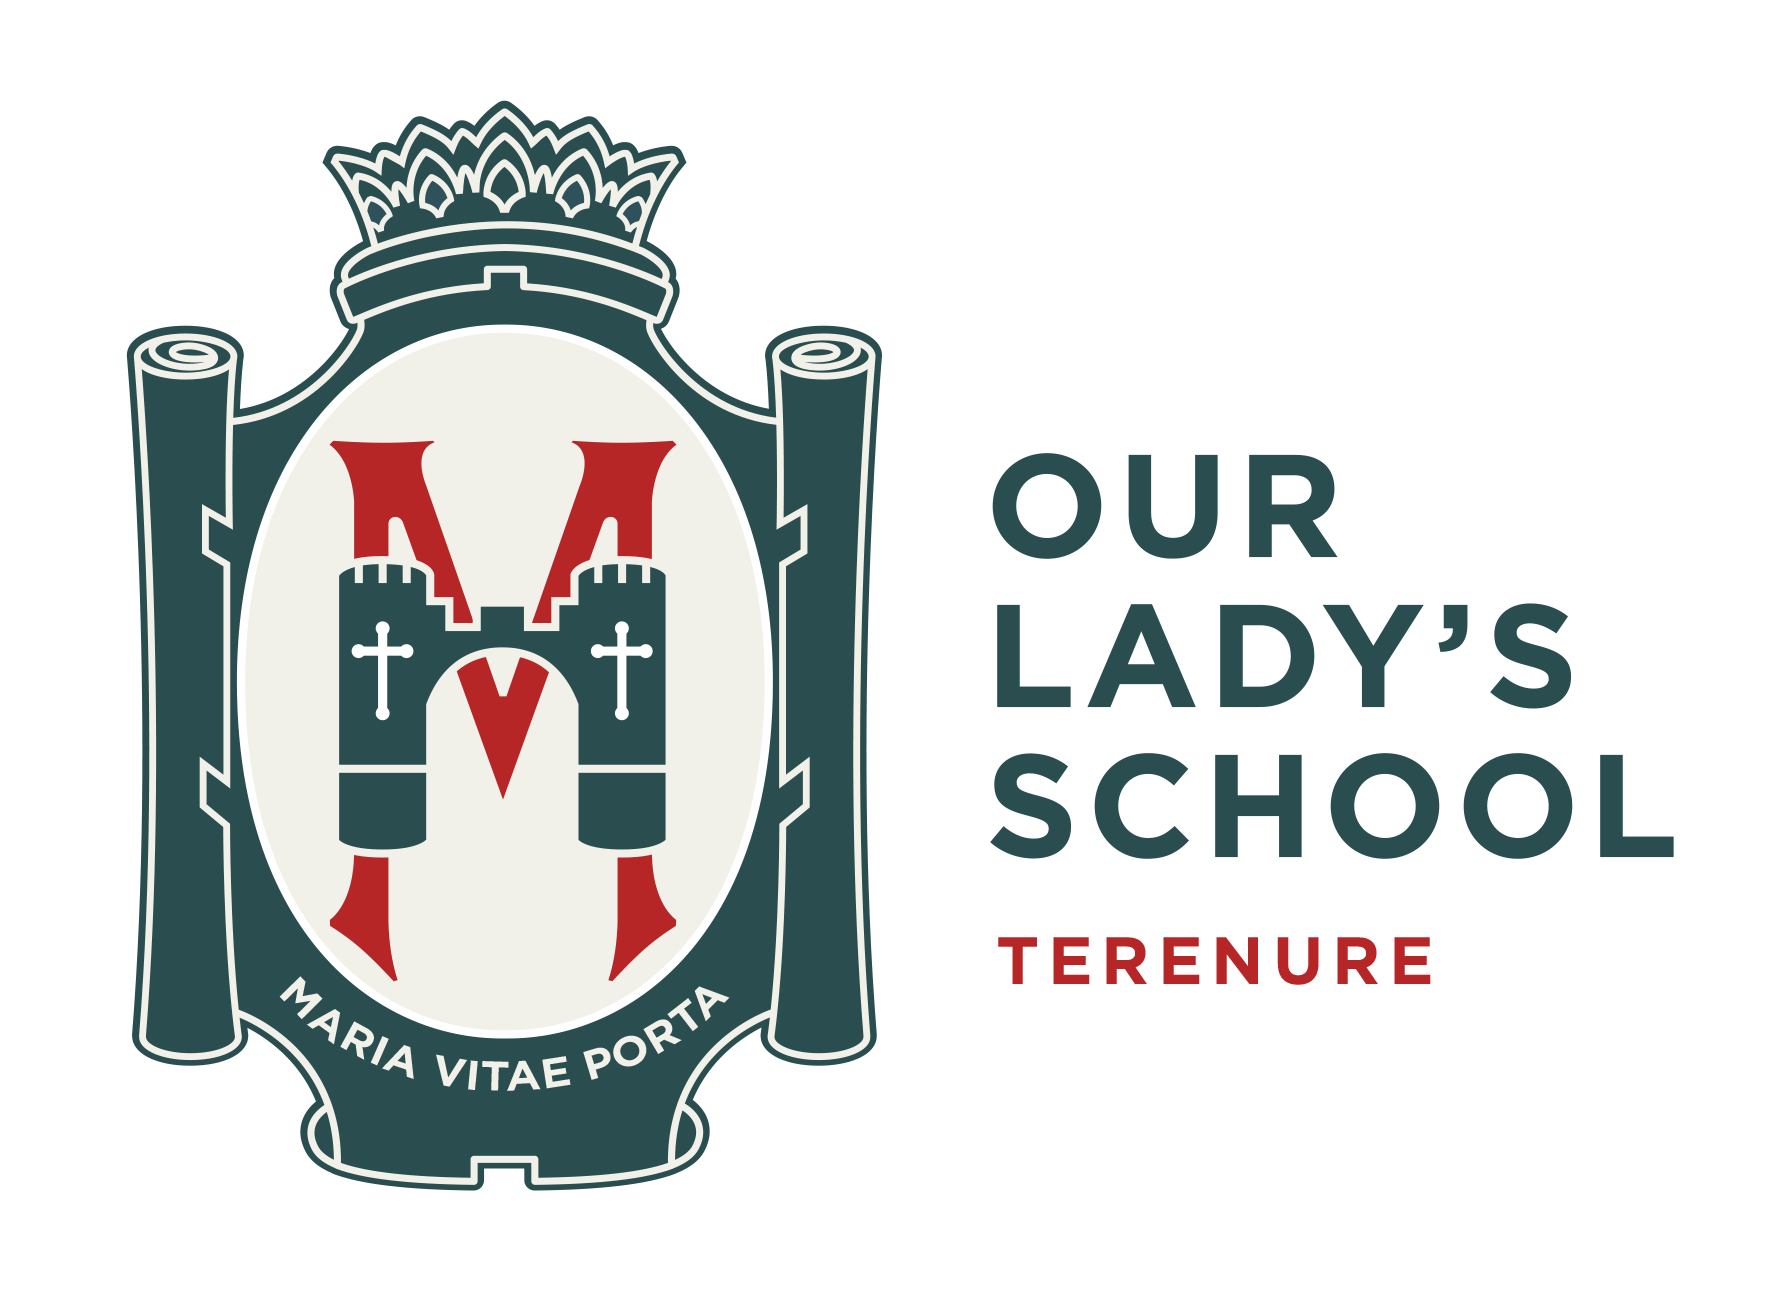 Our Lady's School